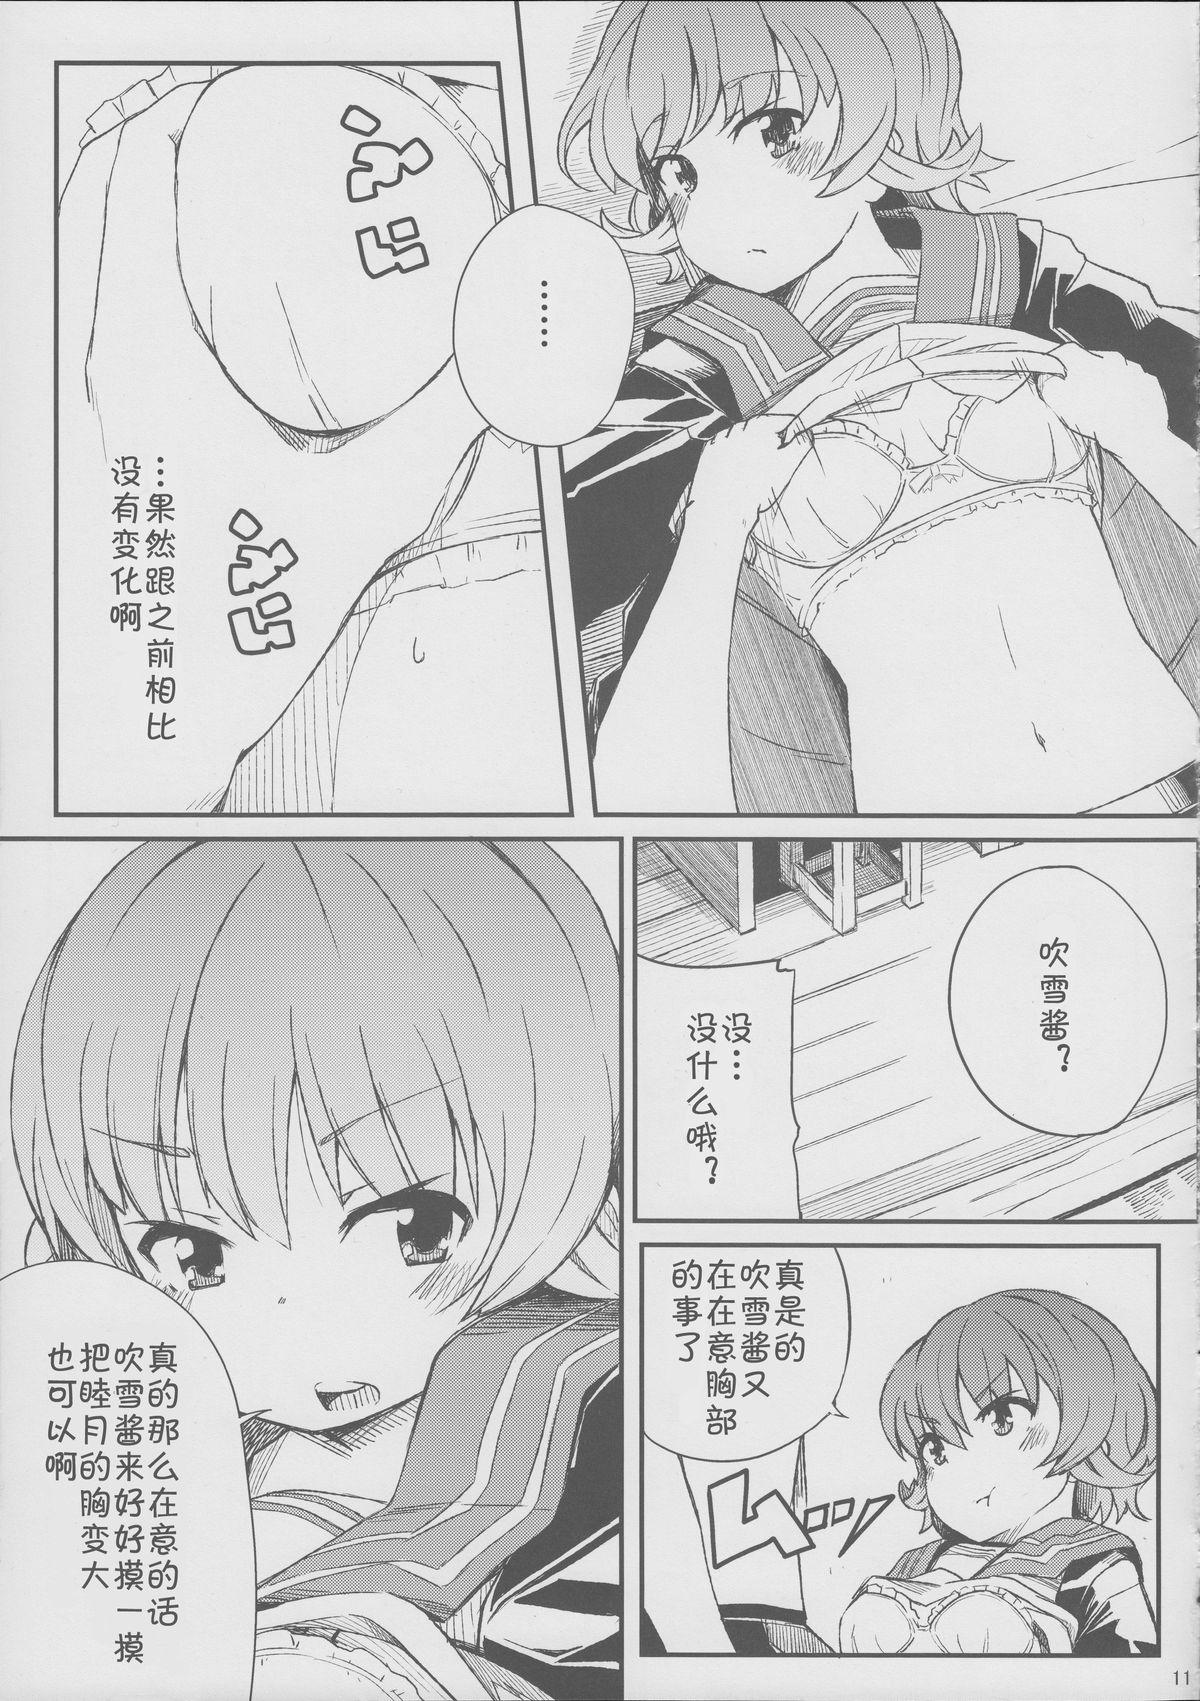 Letsdoeit late flowering - Kantai collection French - Page 13